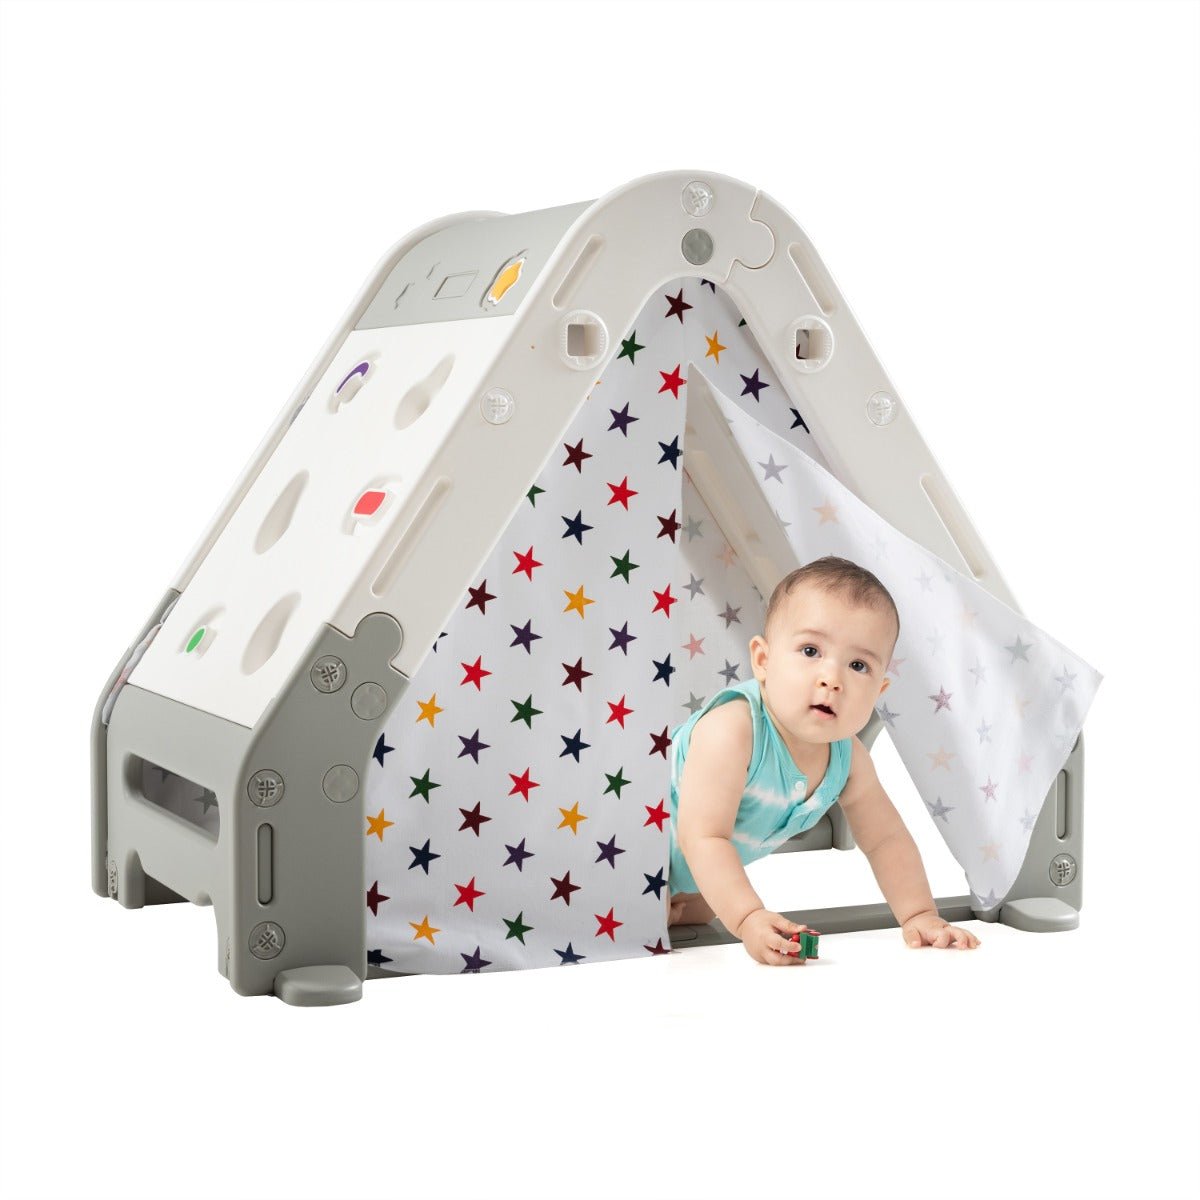 Kids Triangle Climber: Adventure Awaits with Tent, White Board & Sports Fun